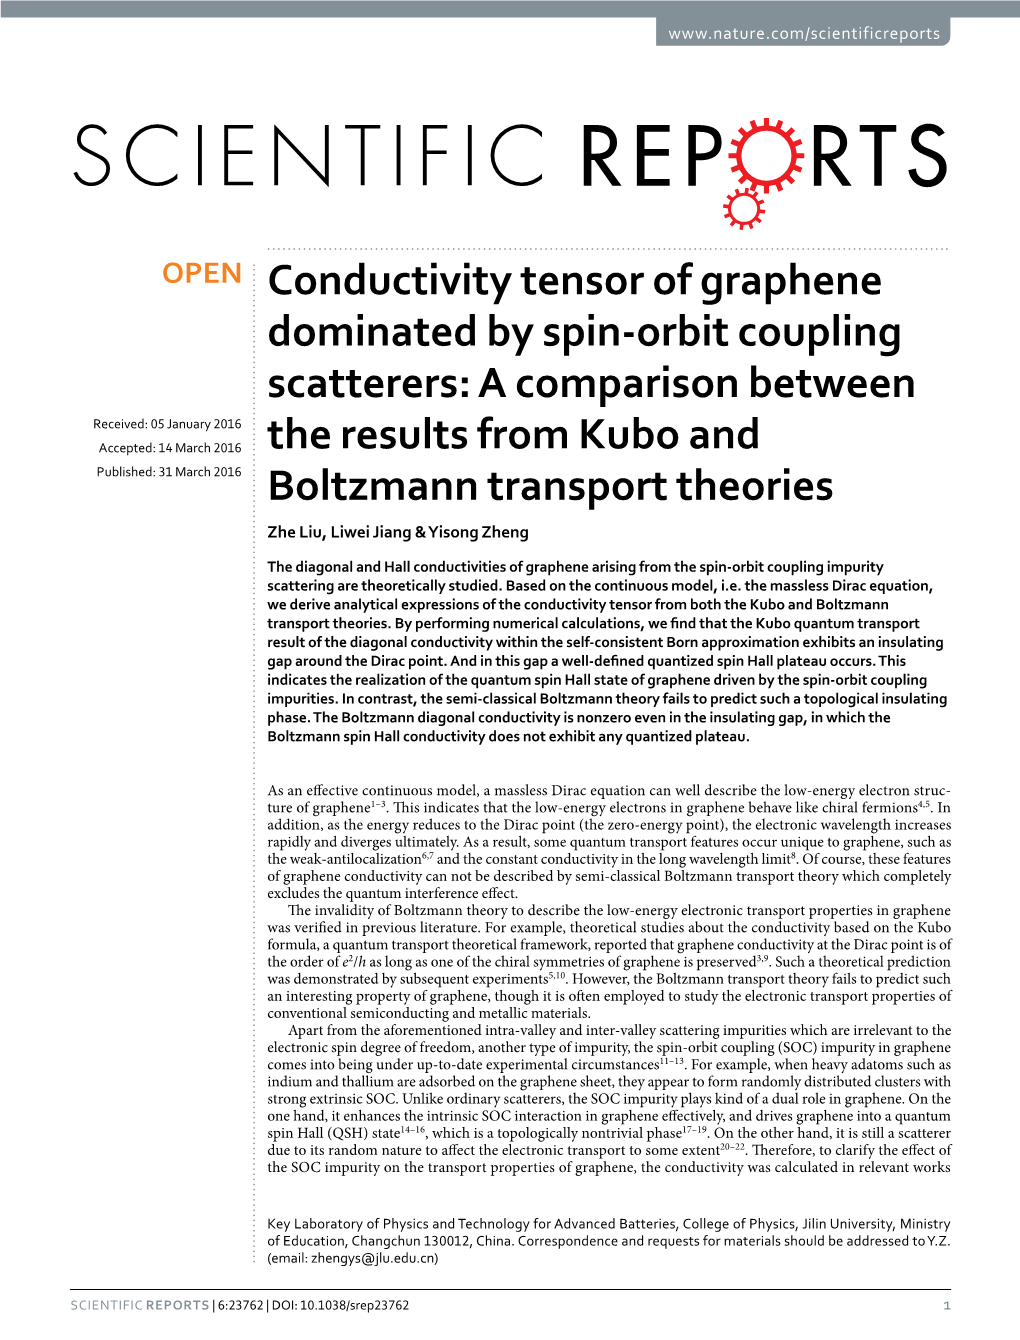 Conductivity Tensor of Graphene Dominated by Spin-Orbit